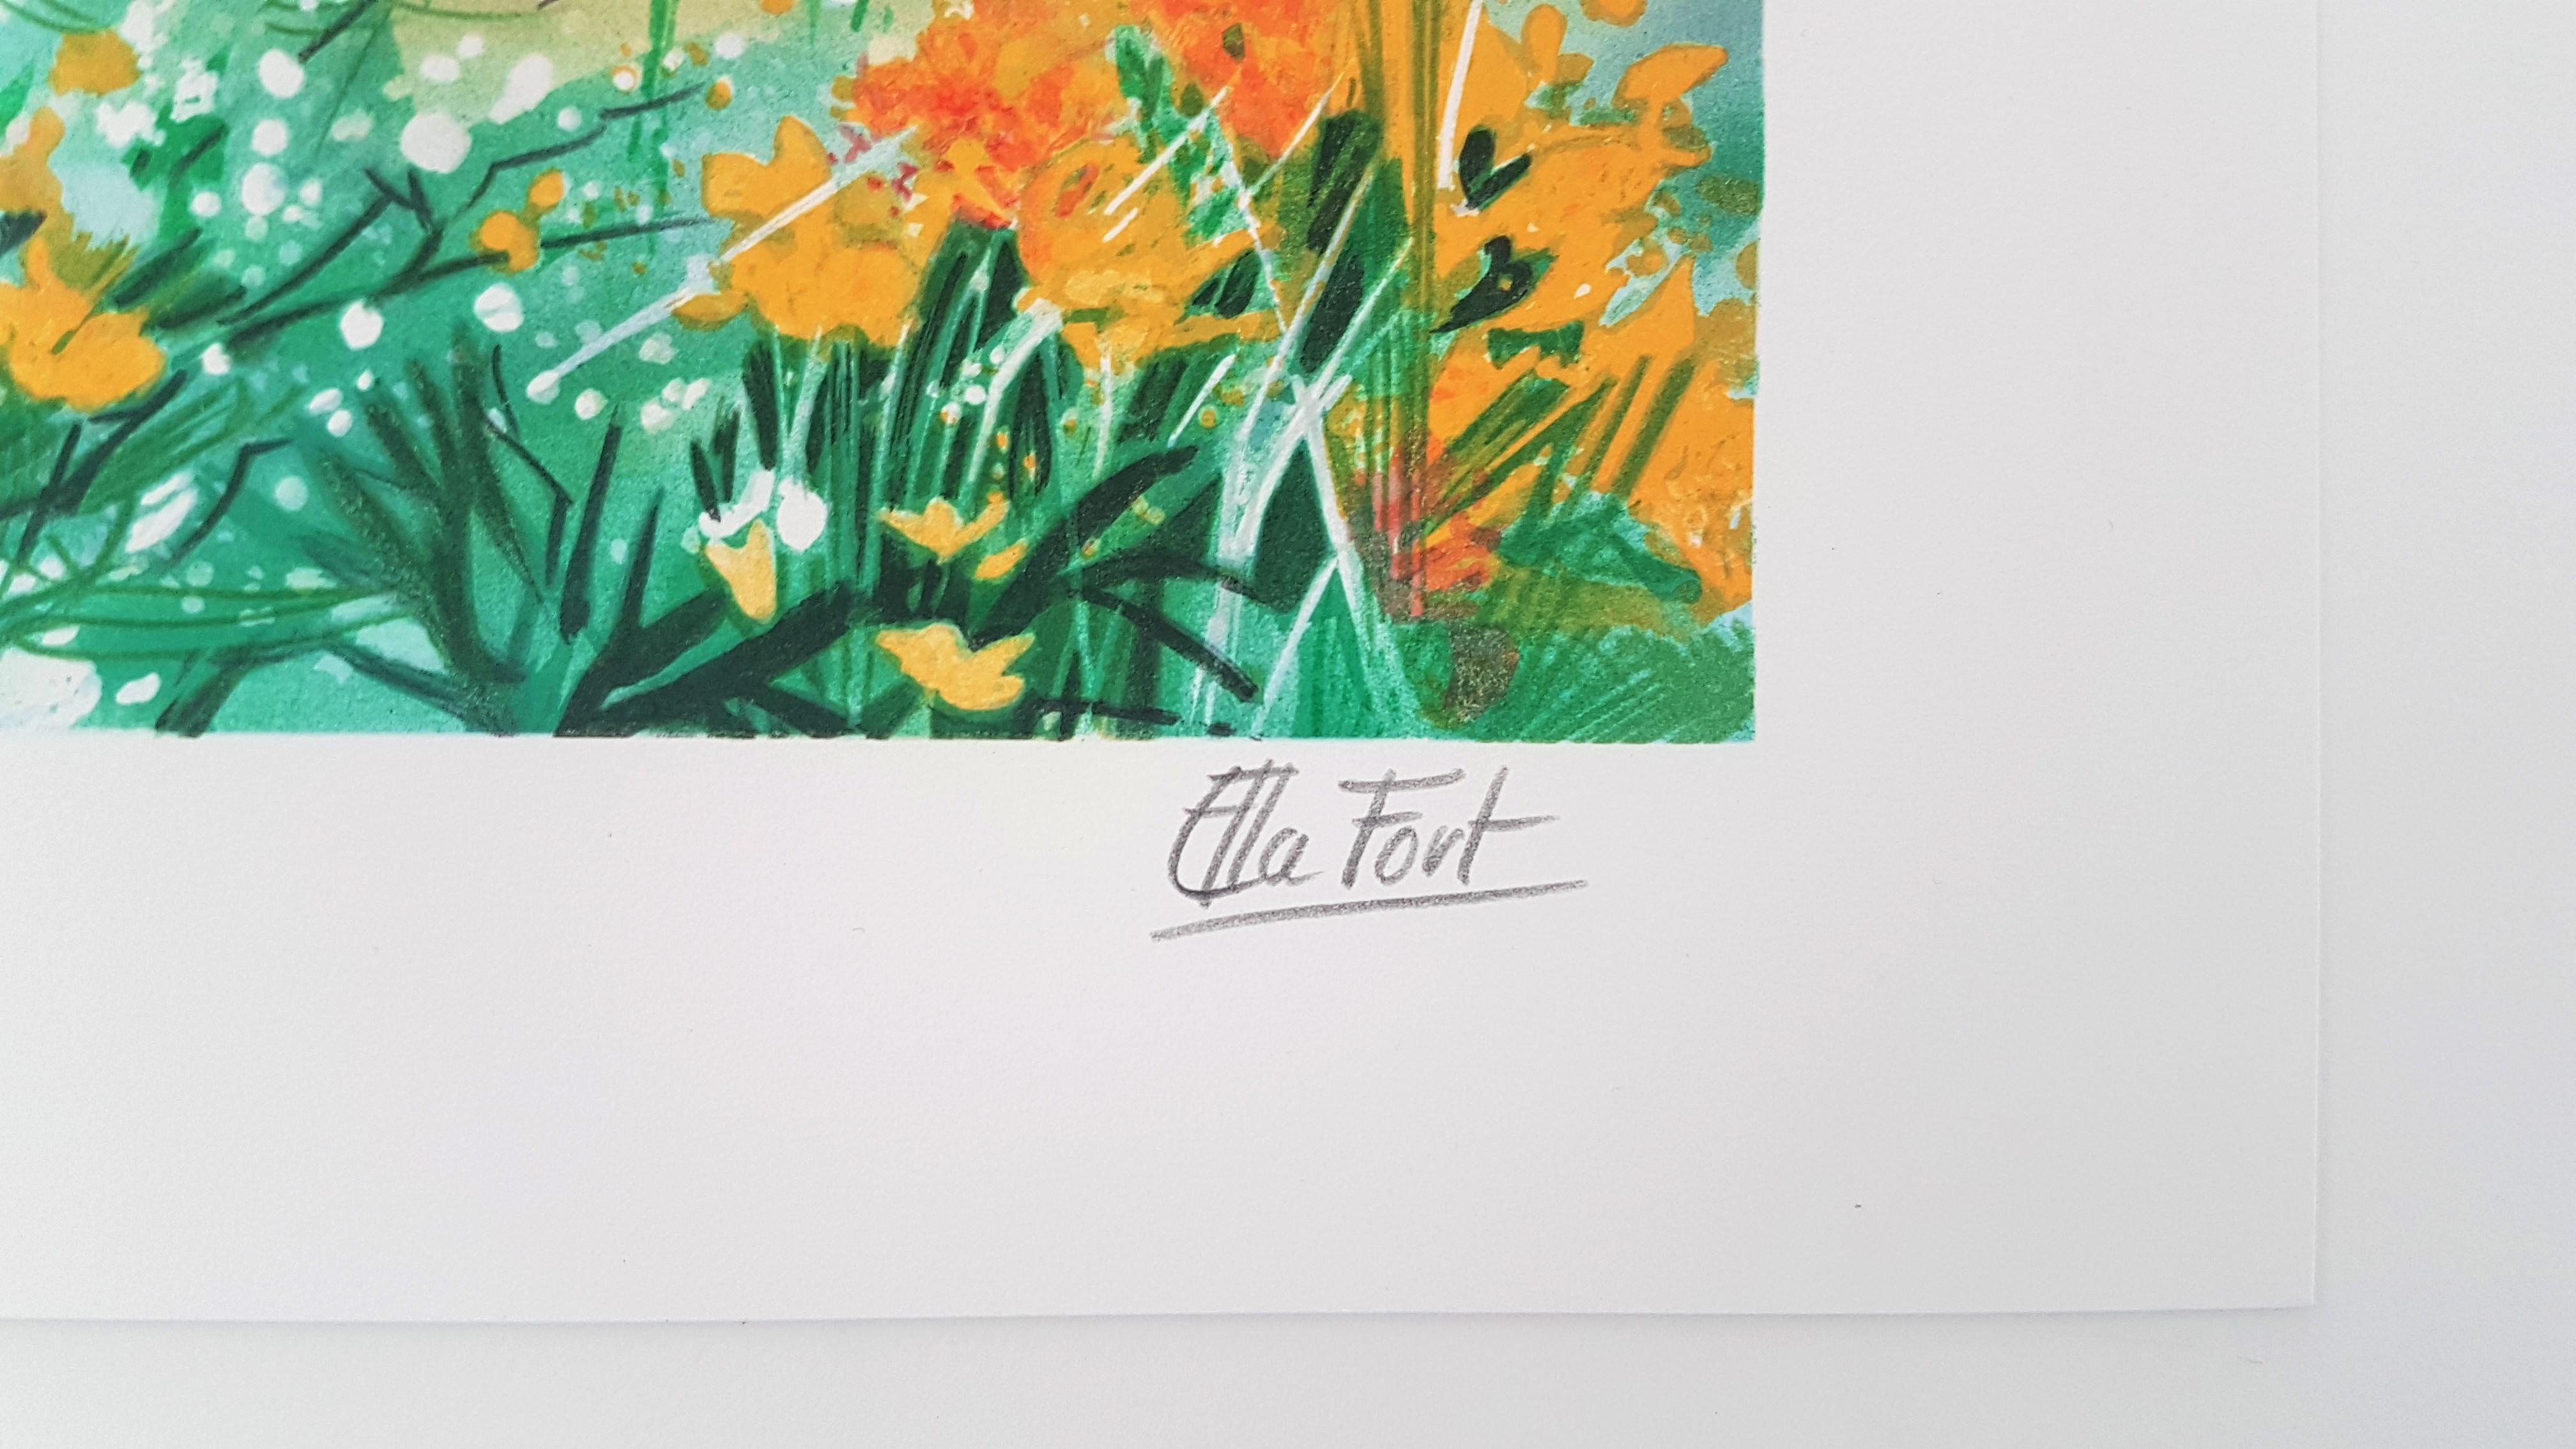 Ella Fort
Spring in Brittany
Color lithograph
Signed, numbered or inscribed
Edition: 390 + E.A.
Size: 7.8 × 11.7 on 10.9 × 14.8 inches  
COA provided

*Framing Options Available - Please Inquire
** Edition number may vary

Tags: Provence landscapes,